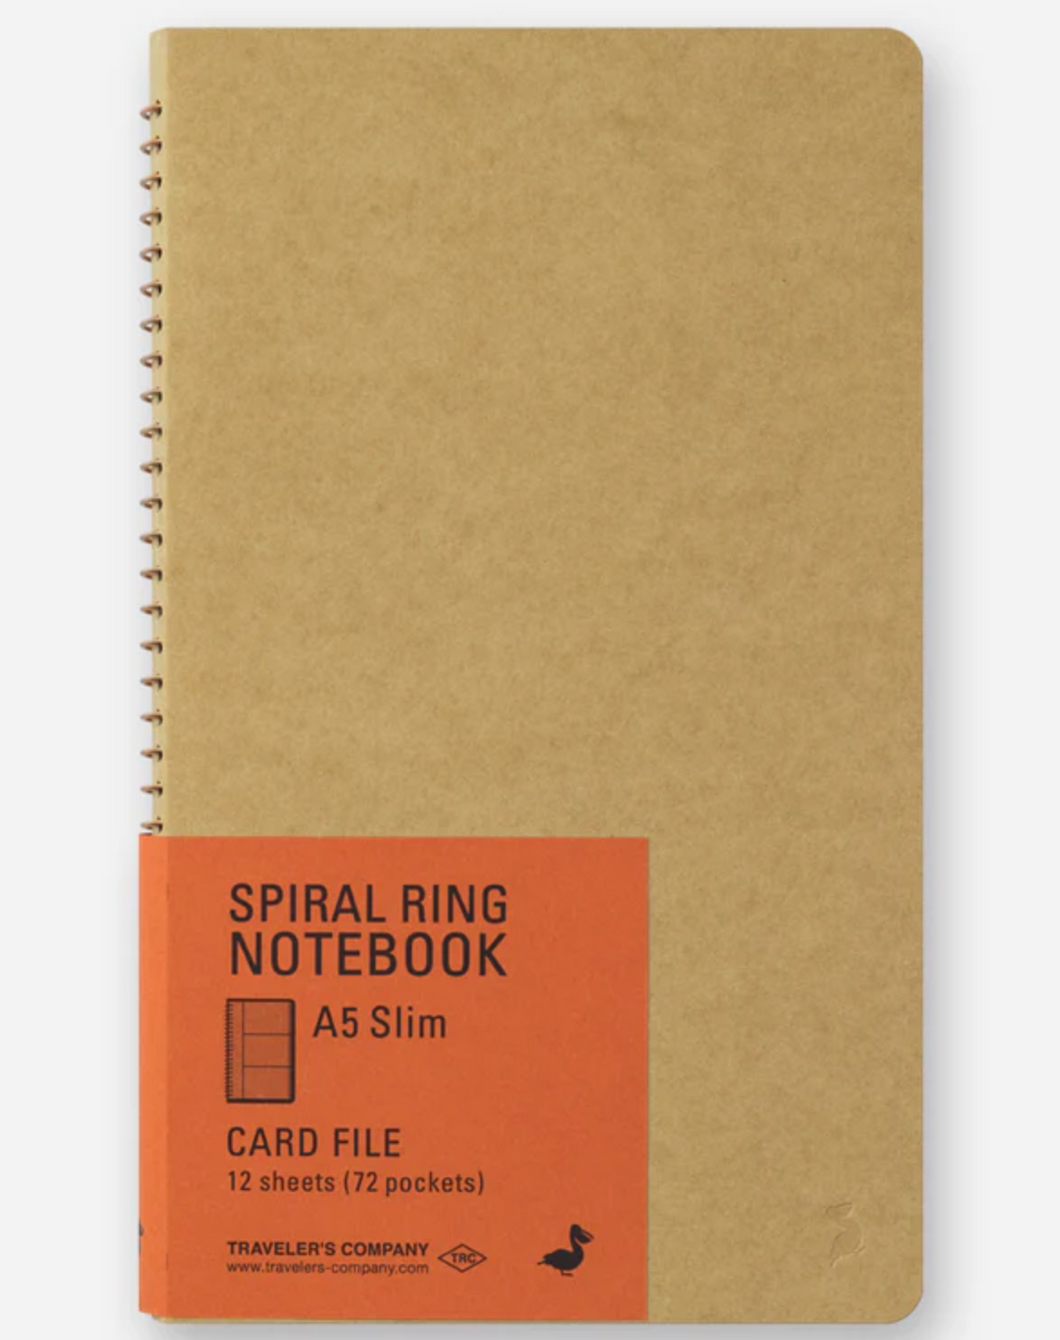 Spiral Ring Notebook-Card File-A5 Slim | Traveler's Company